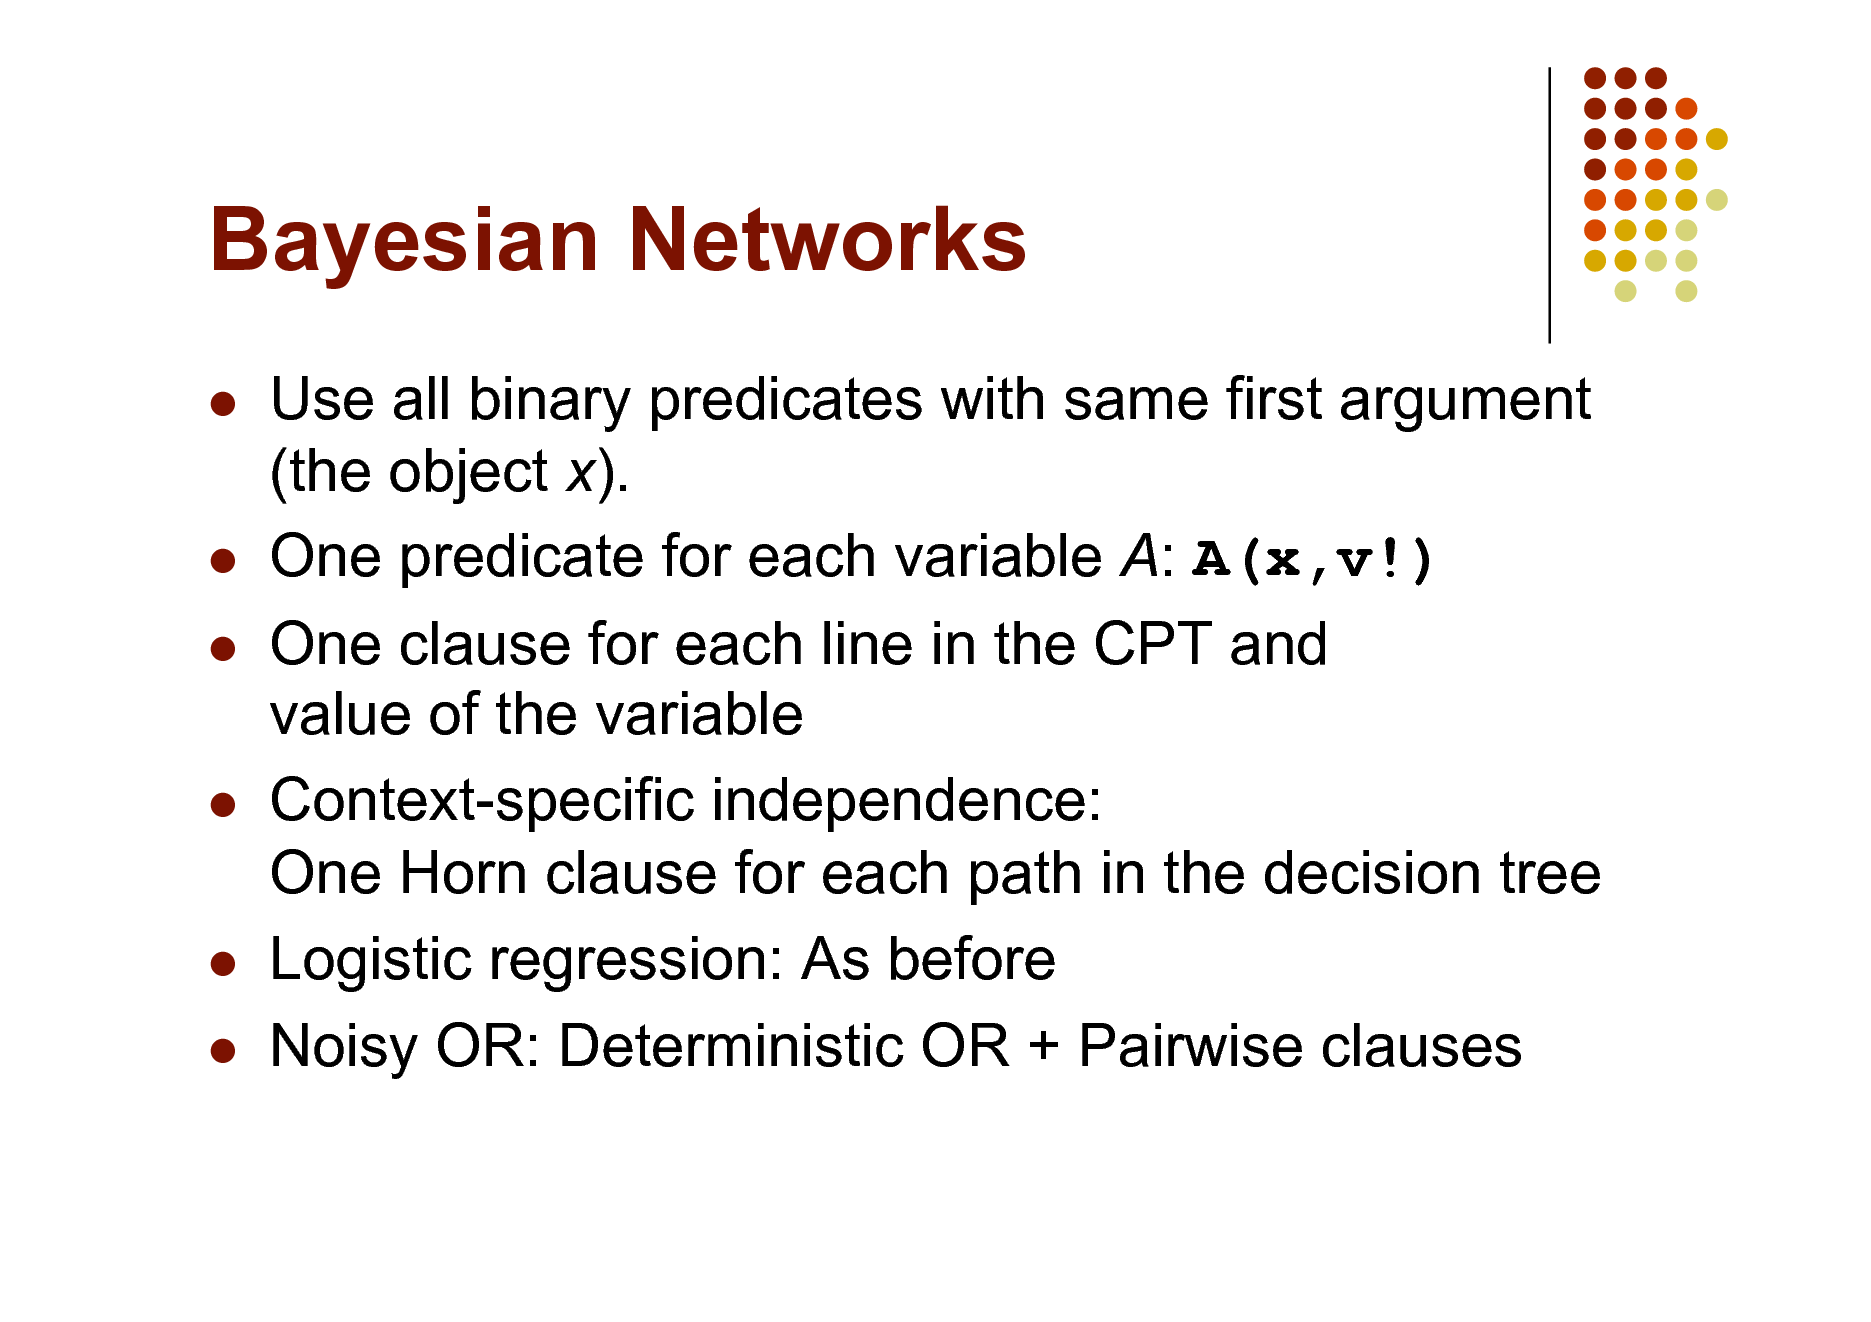 Slide: Bayesian Networks


 



 

Use all binary predicates with same first argument (the object x). One predicate for each variable A: A(x,v!) One clause for each line in the CPT and value of the variable Context-specific independence: One Horn clause for each path in the decision tree Logistic regression: As before Noisy OR: Deterministic OR + Pairwise clauses

